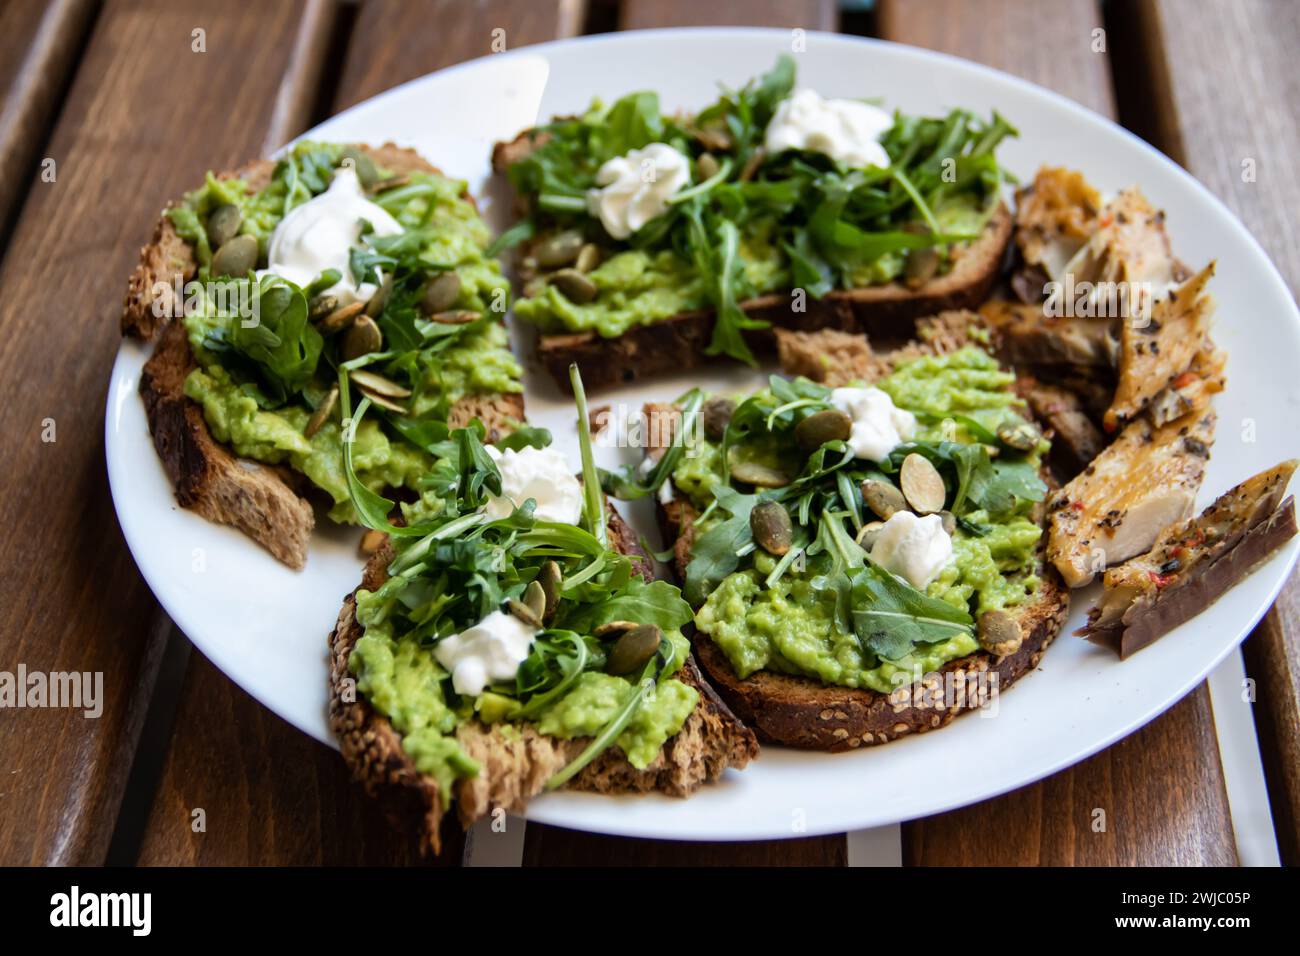 Smashed avocado on Toast with Labneh, Lemon, Parsley, Cheese, Edamame and different dried seeds, sunflower and pumpkin, very healthy and vegan snack Stock Photo